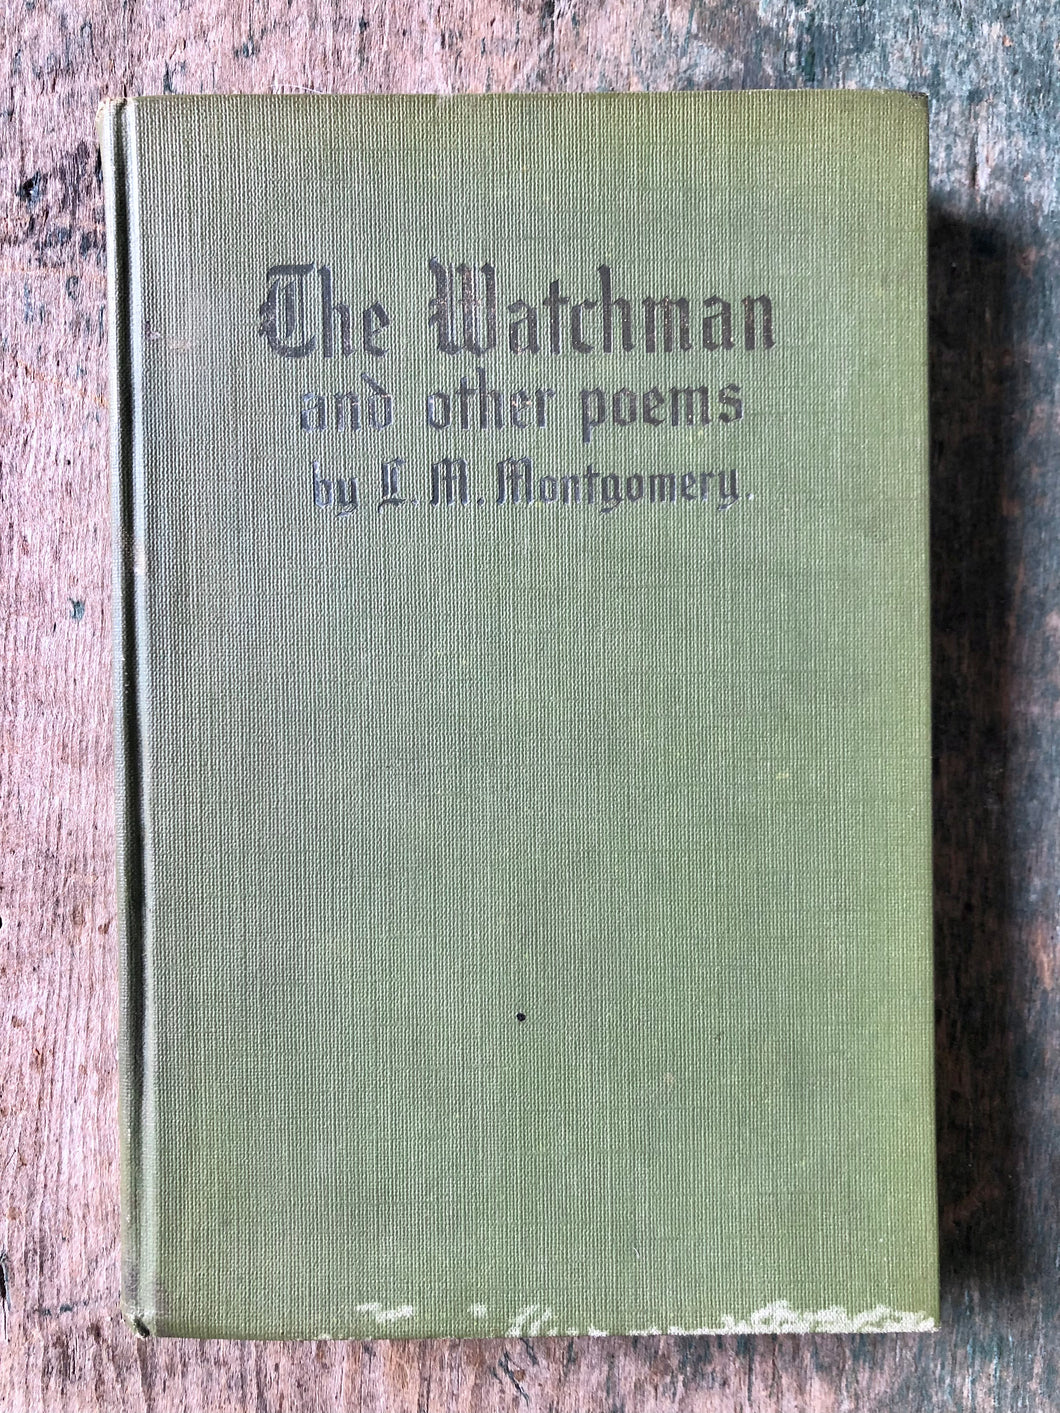 The Watchman and Other Poems. by L. M. Montgomery